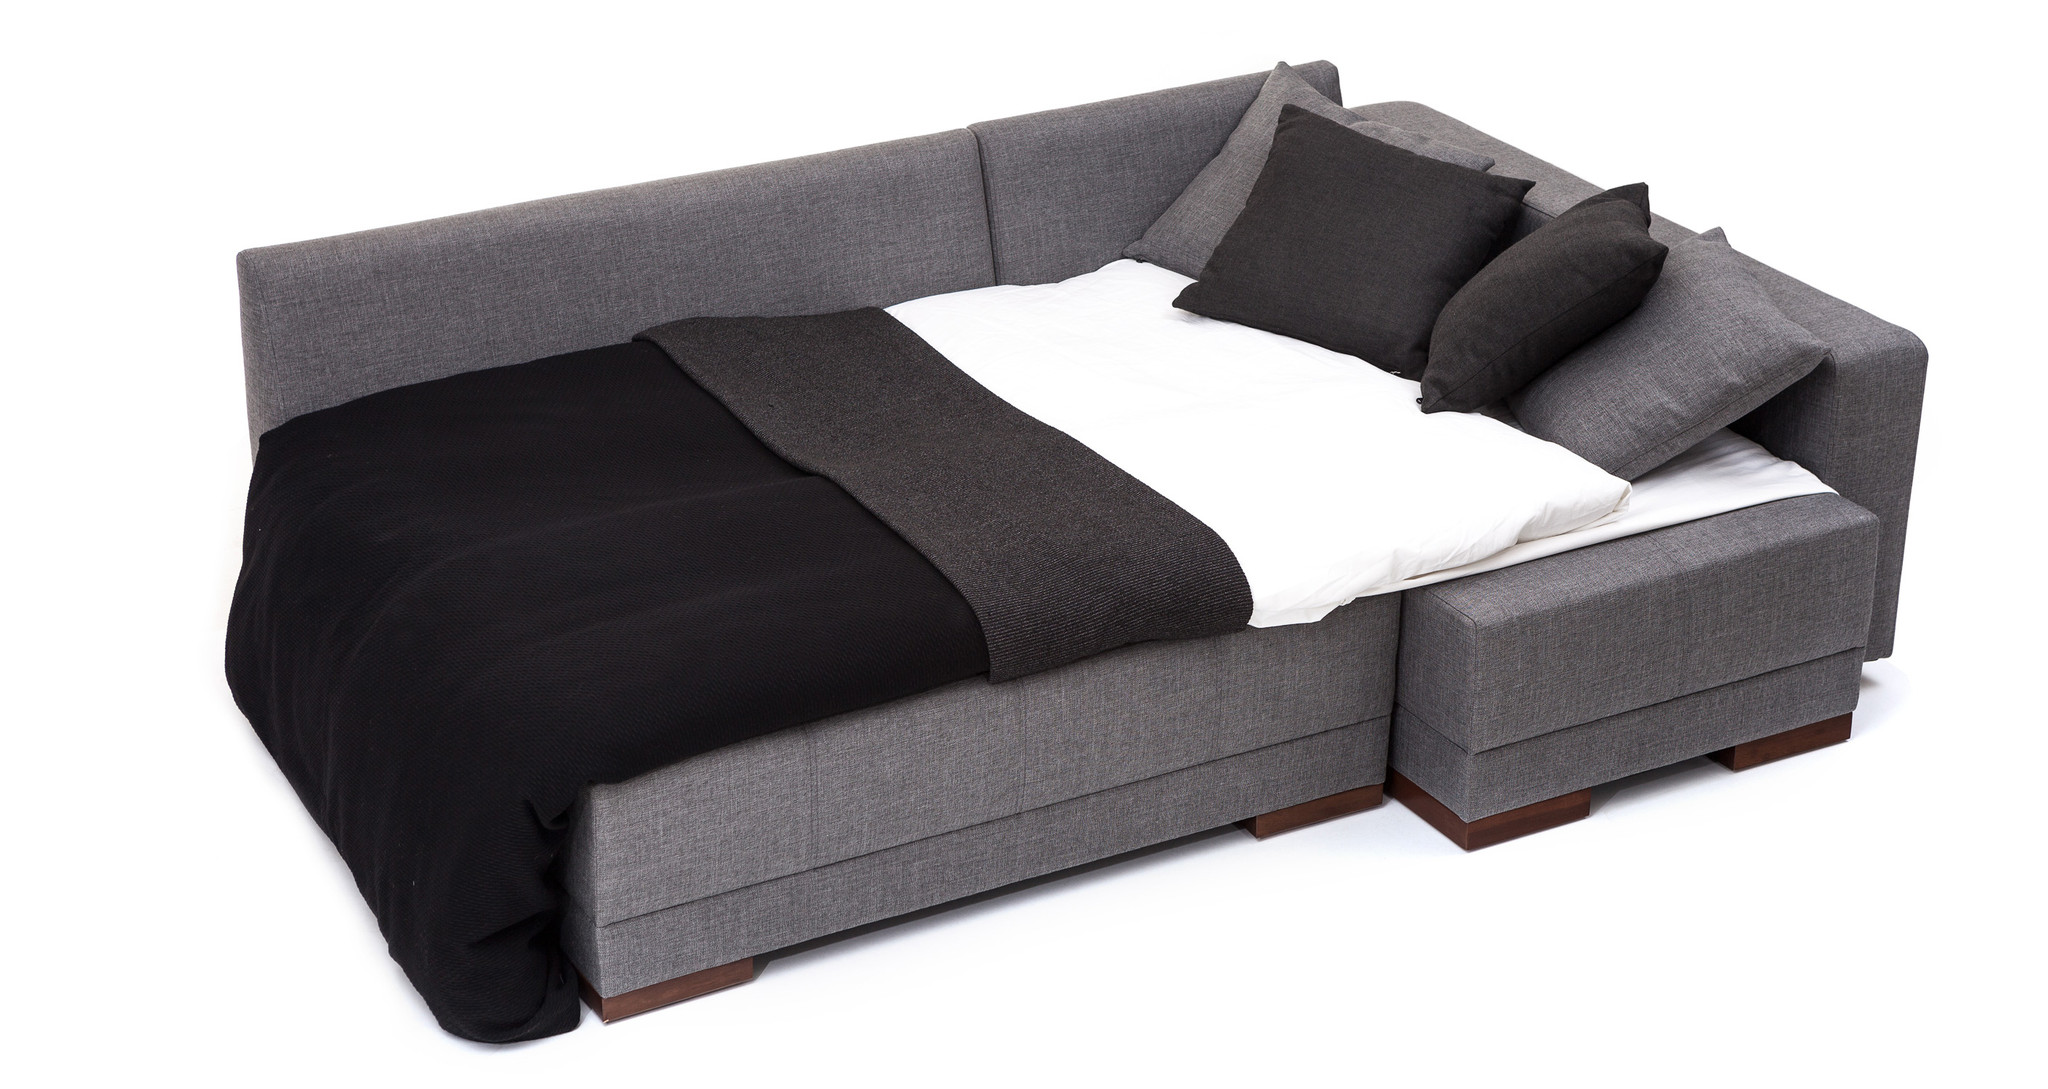 convertible sofa bed with storage